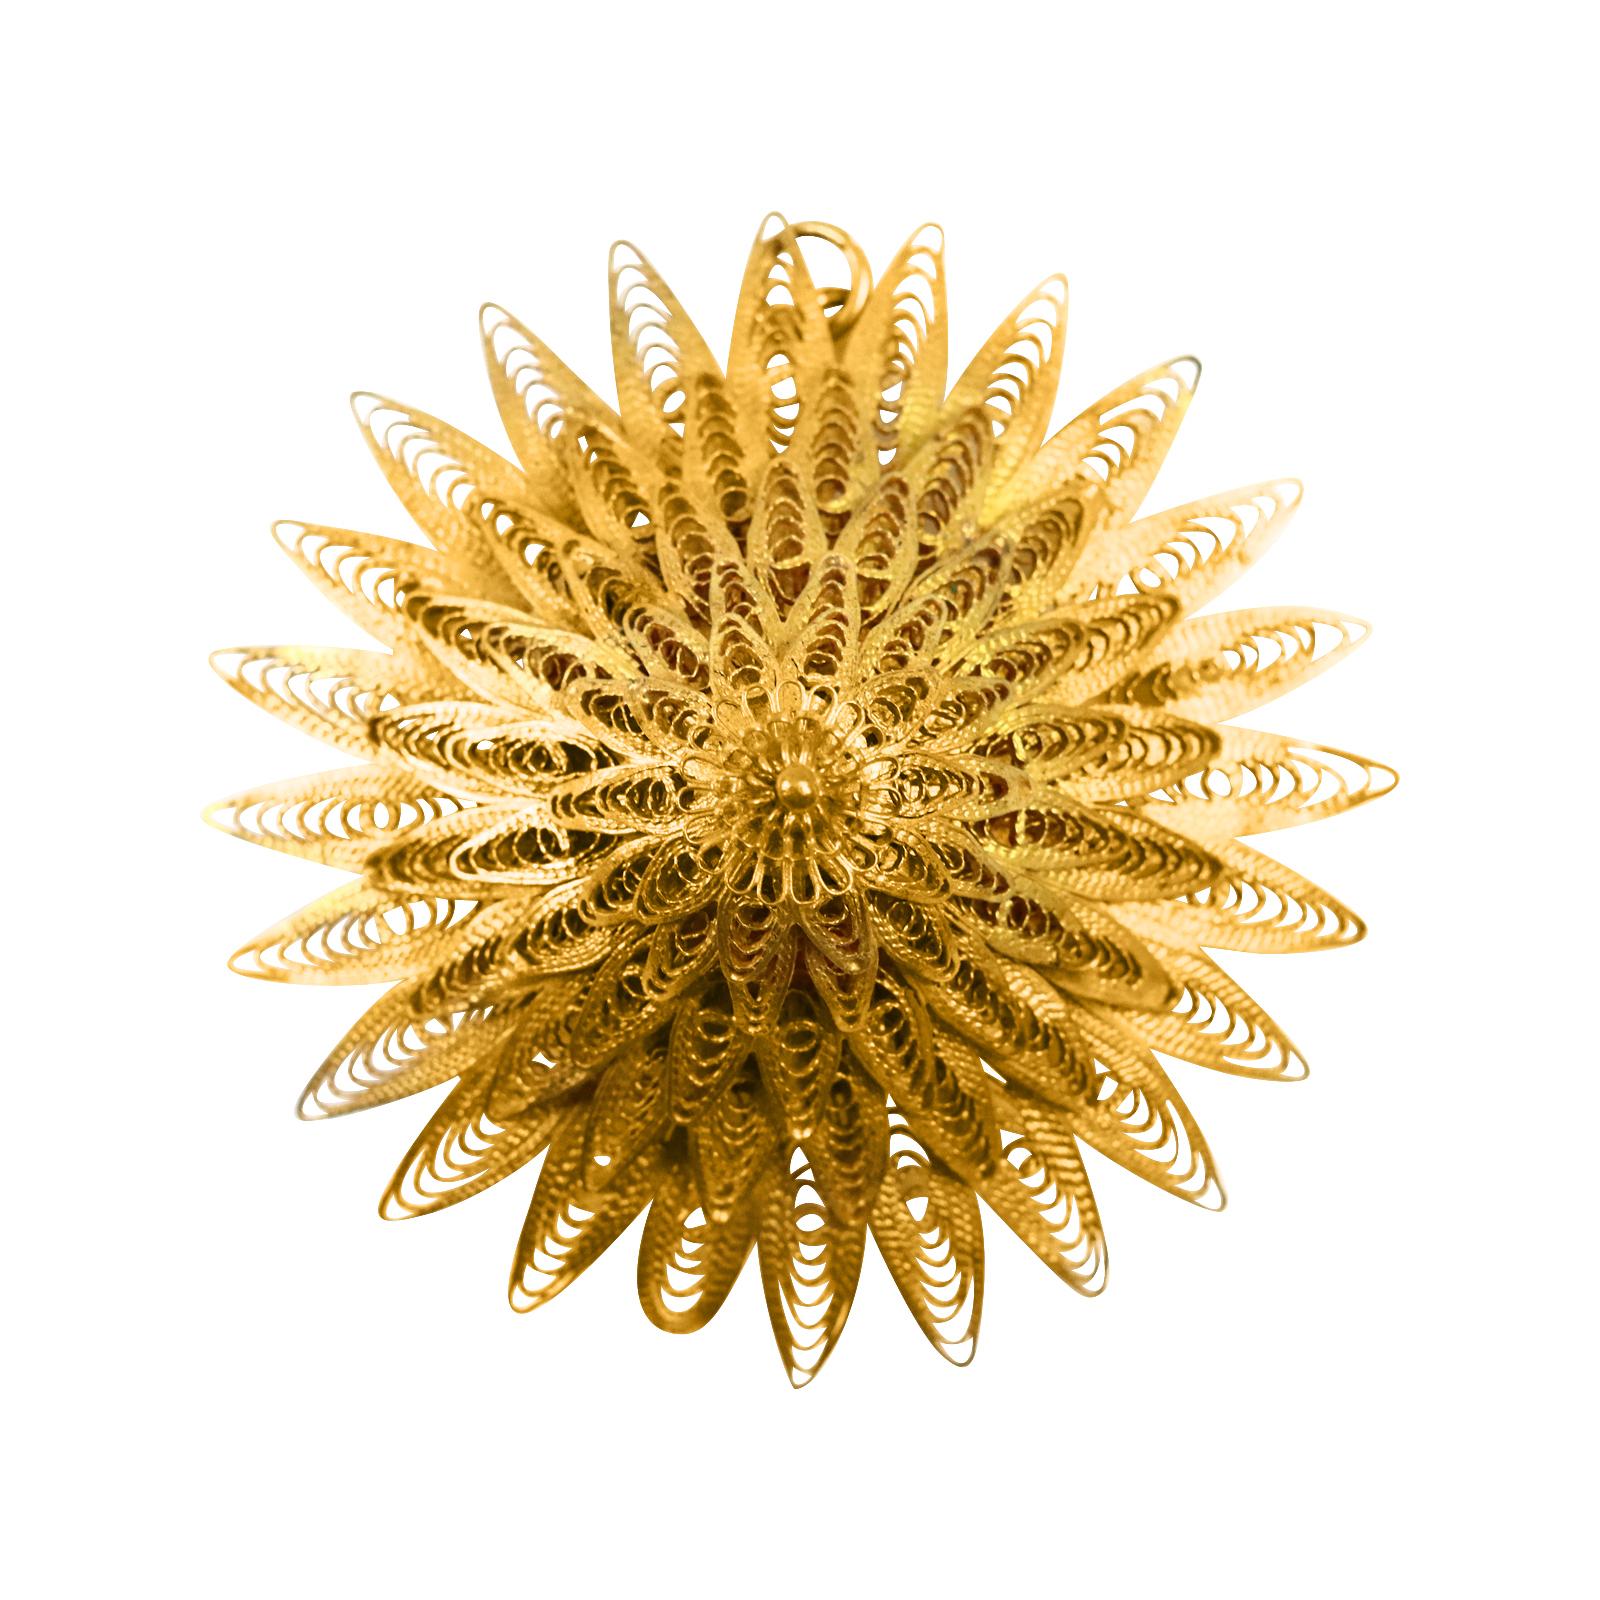 Vintage Spiky Gold Filigree Brooch, Choker or Pendant Circa 1940s In Good Condition For Sale In New York, NY